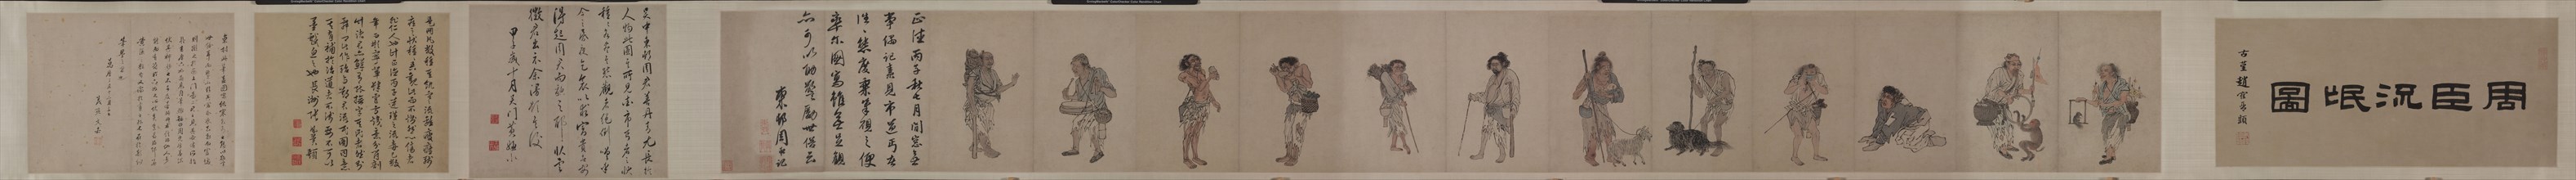 Beggars and Street Characters, 1516. Zhou Chen (Chinese, c. 1450-c. 1536). Handscroll, ink and